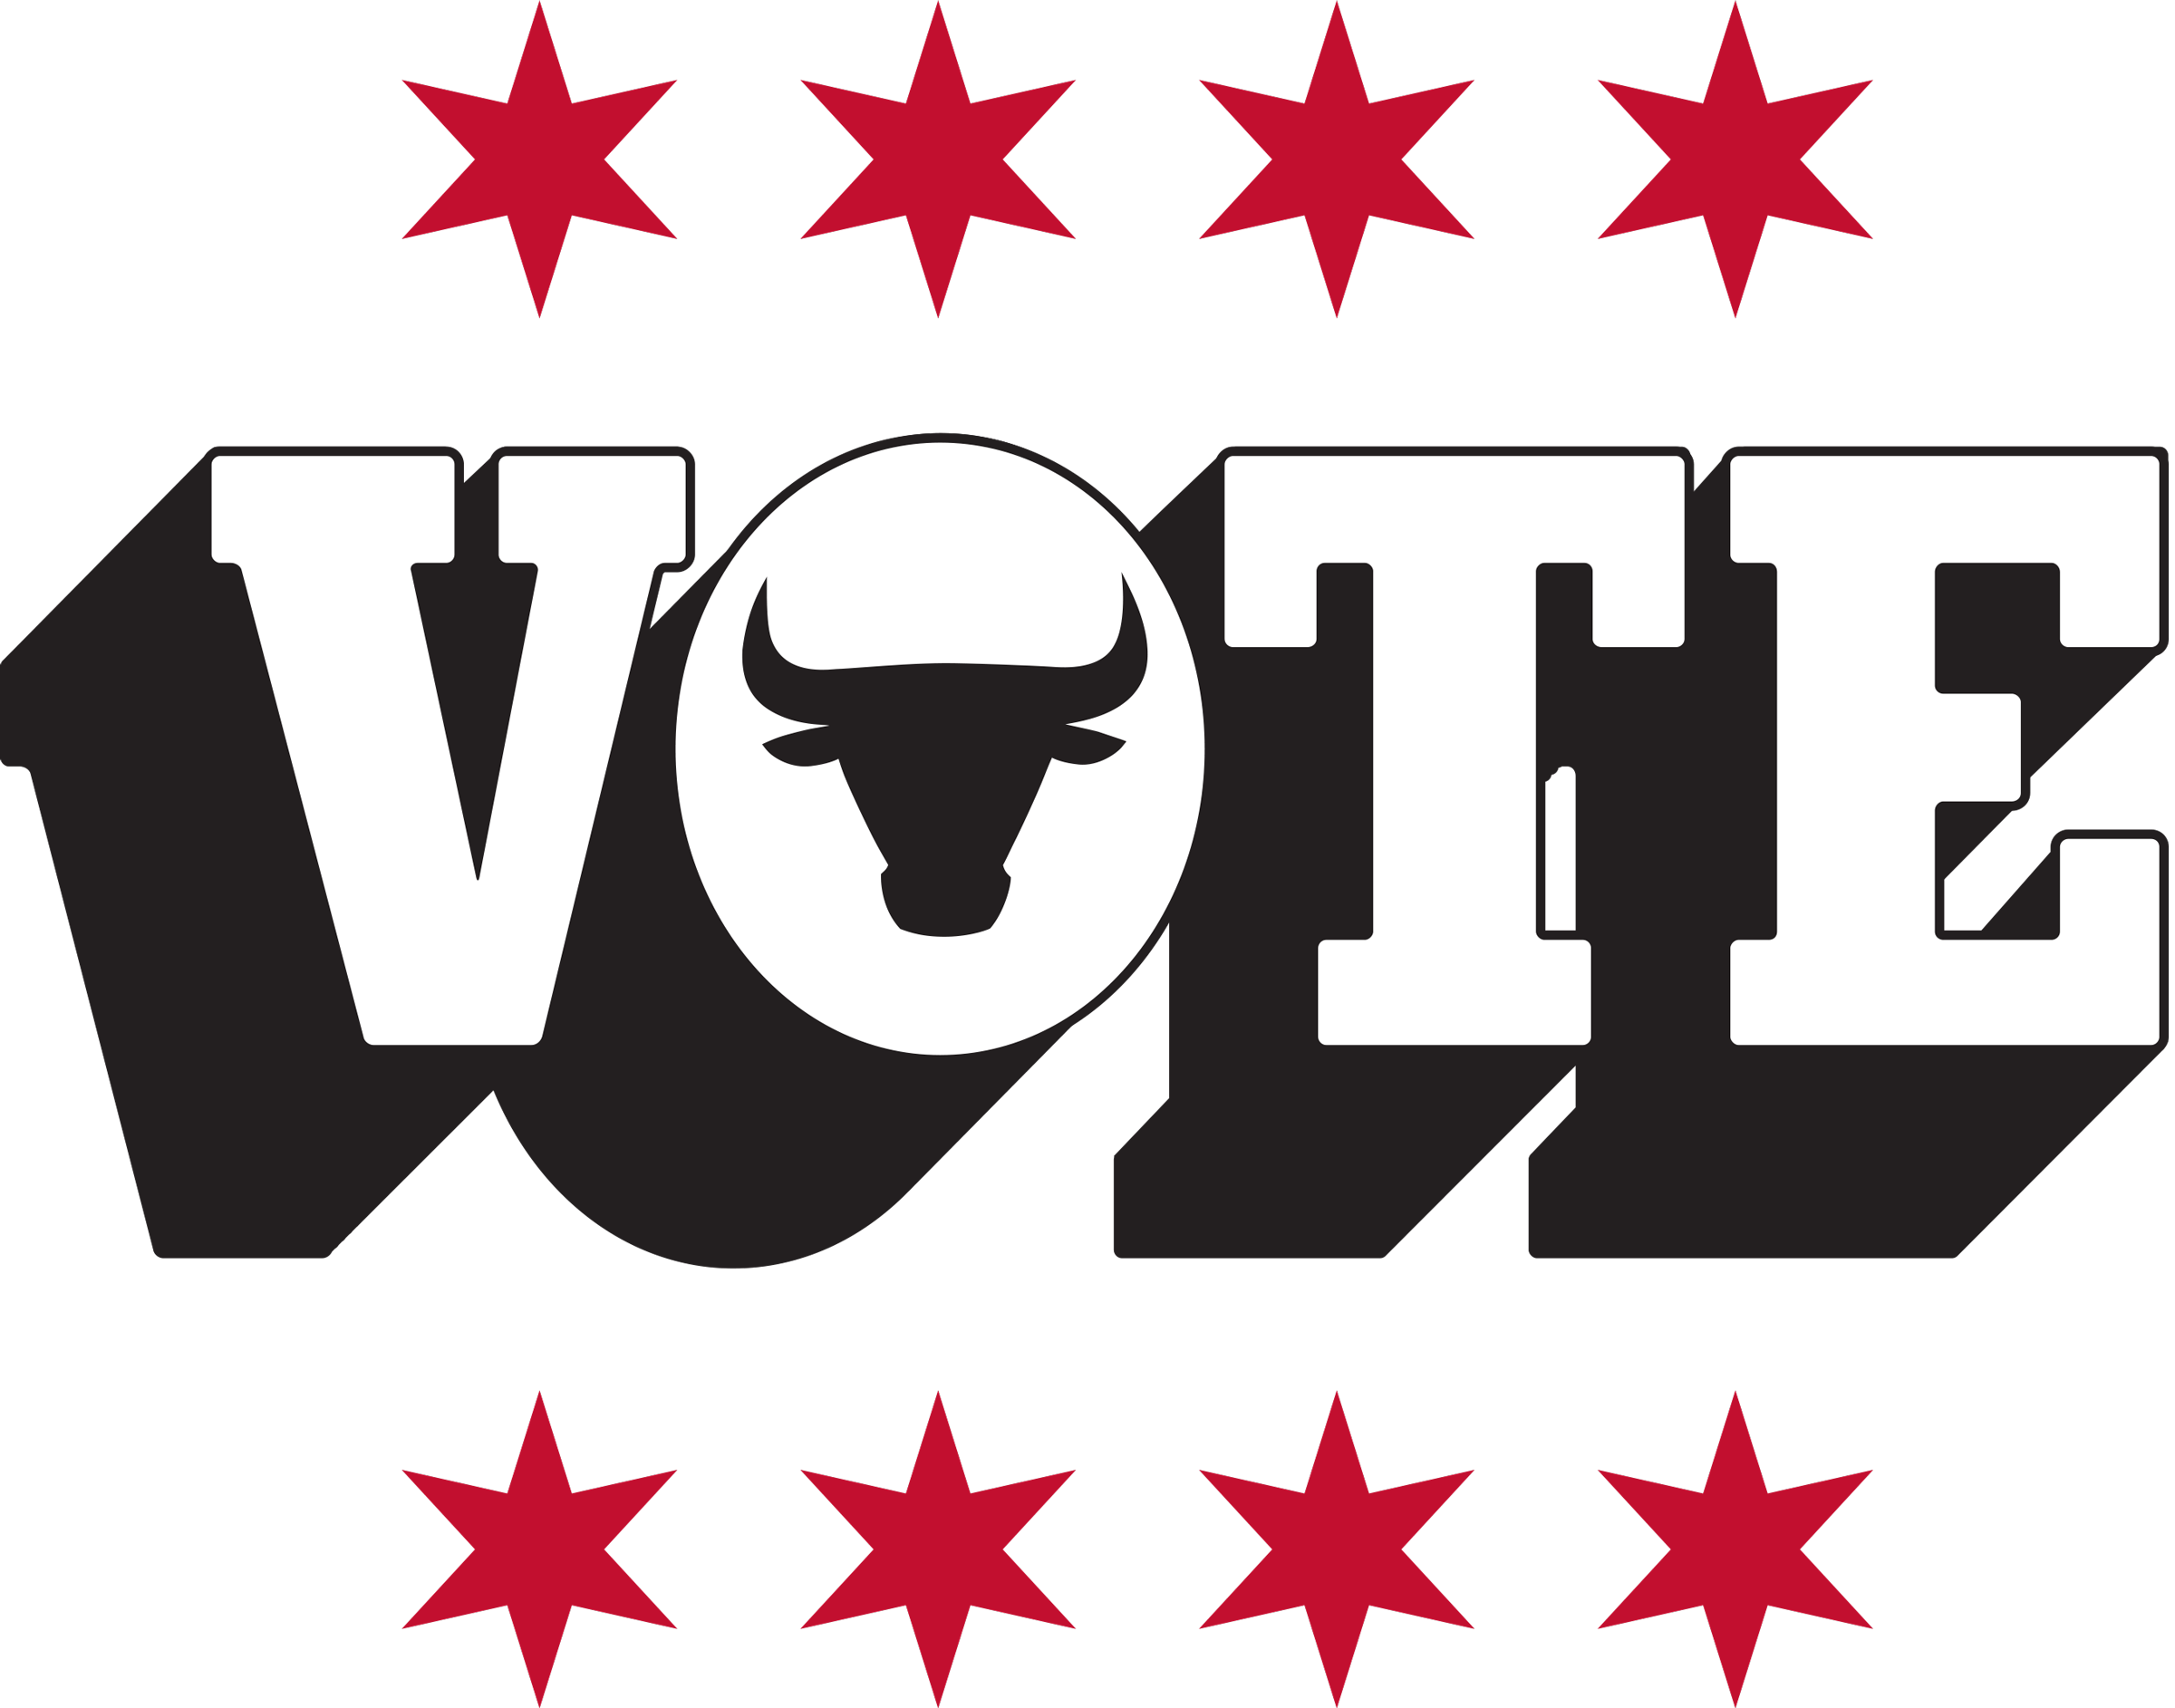 The Chicago Bulls encourage you to get out and vote.